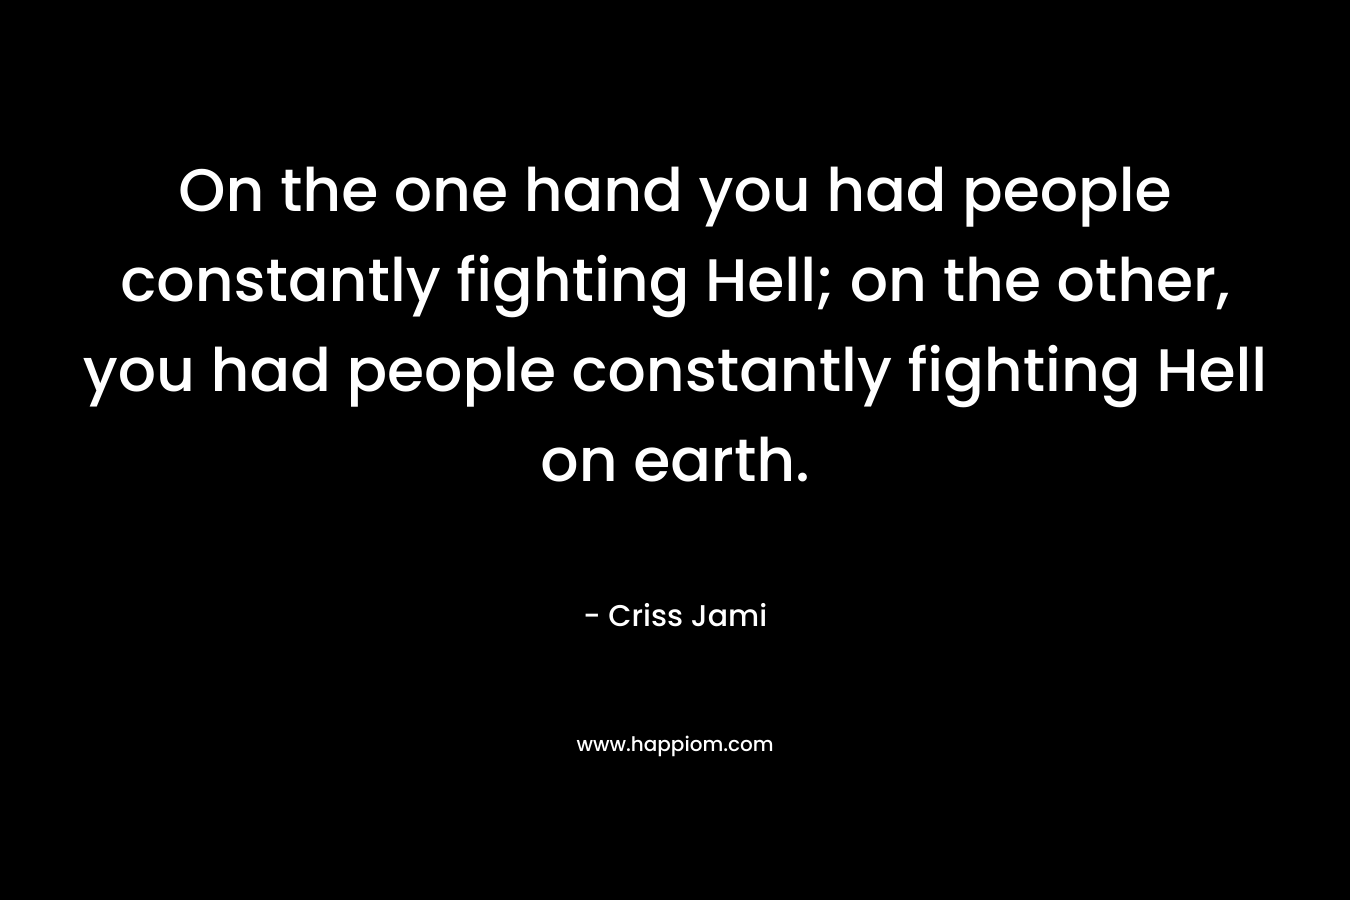 On the one hand you had people constantly fighting Hell; on the other, you had people constantly fighting Hell on earth.